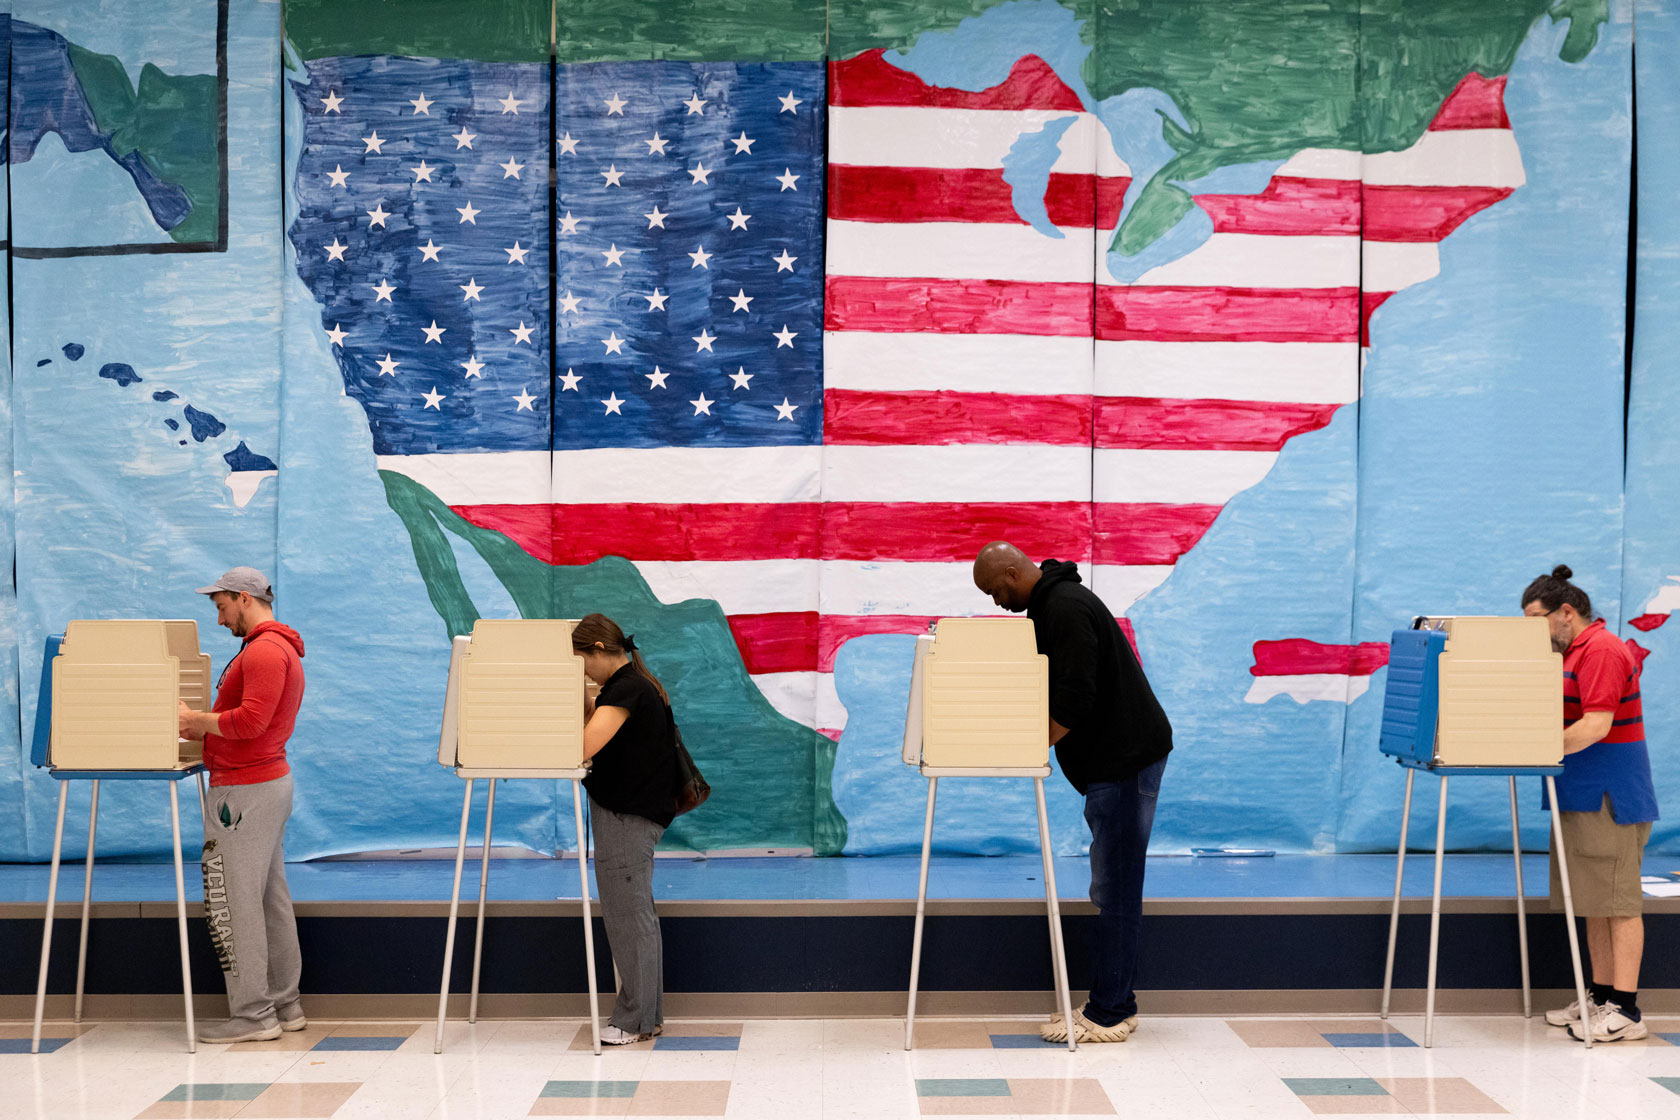 Four voters in a line fill out their ballots in front of a large map of the United States on the wall.